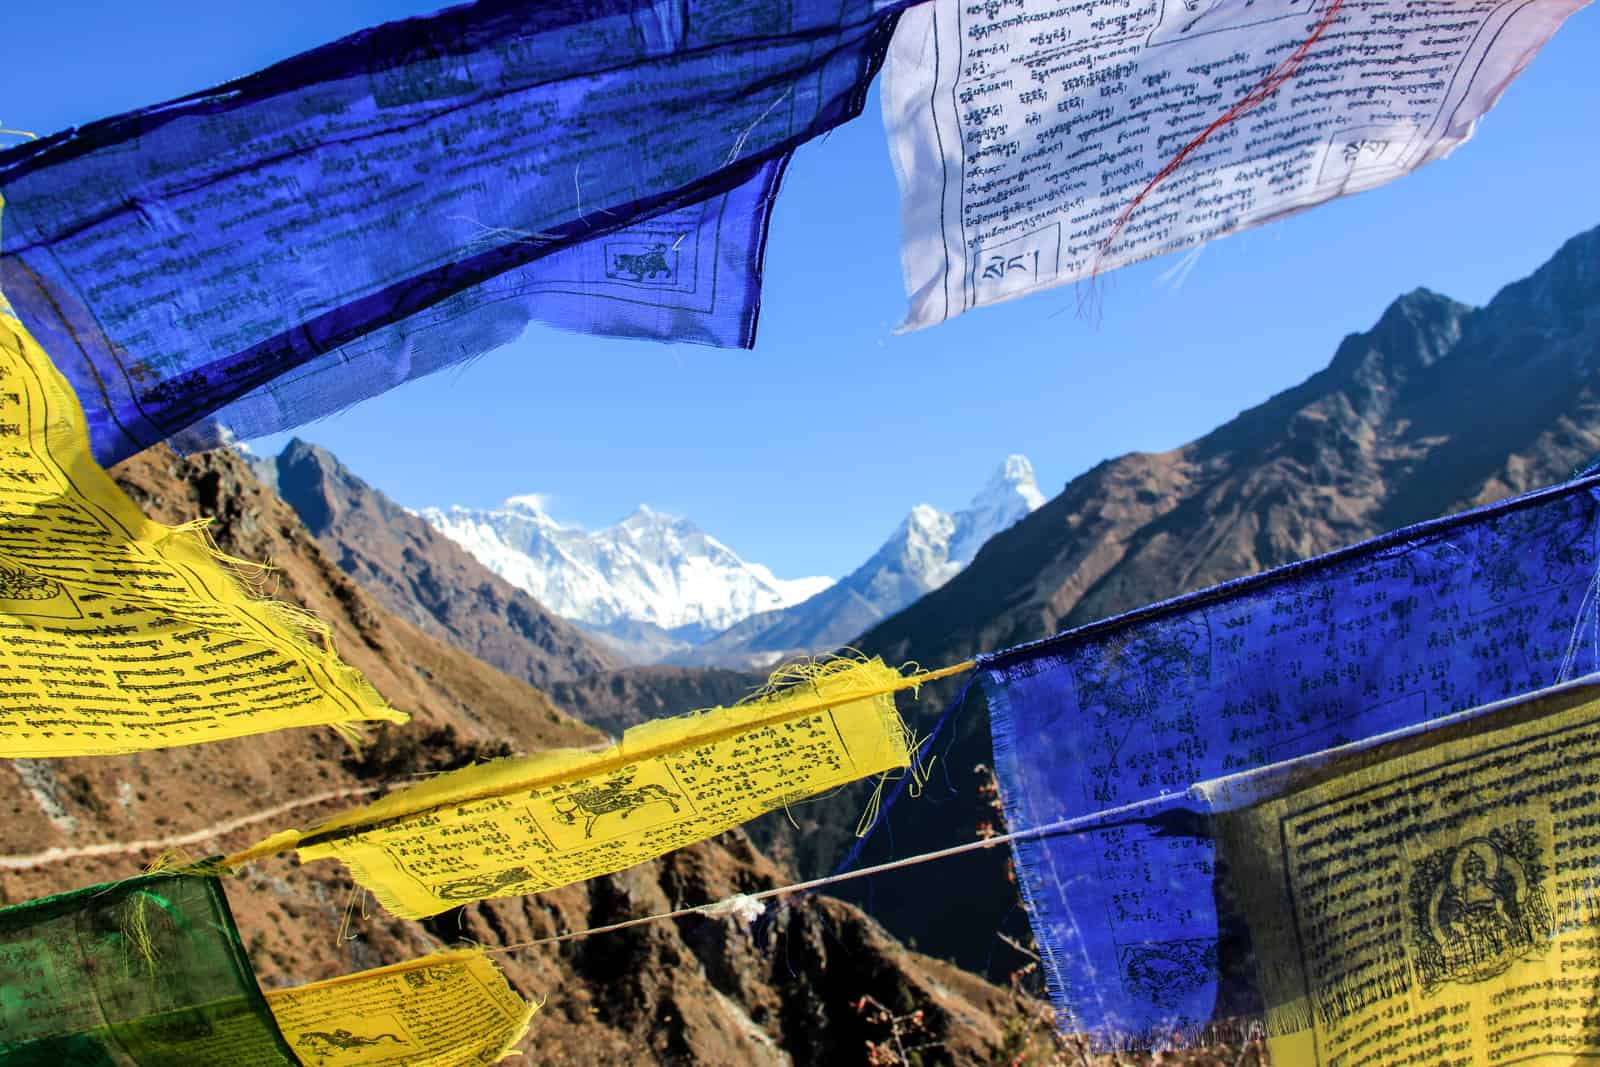 Blue, yellow and white prayer flags blowing in the wind in front of a mountain landscape.